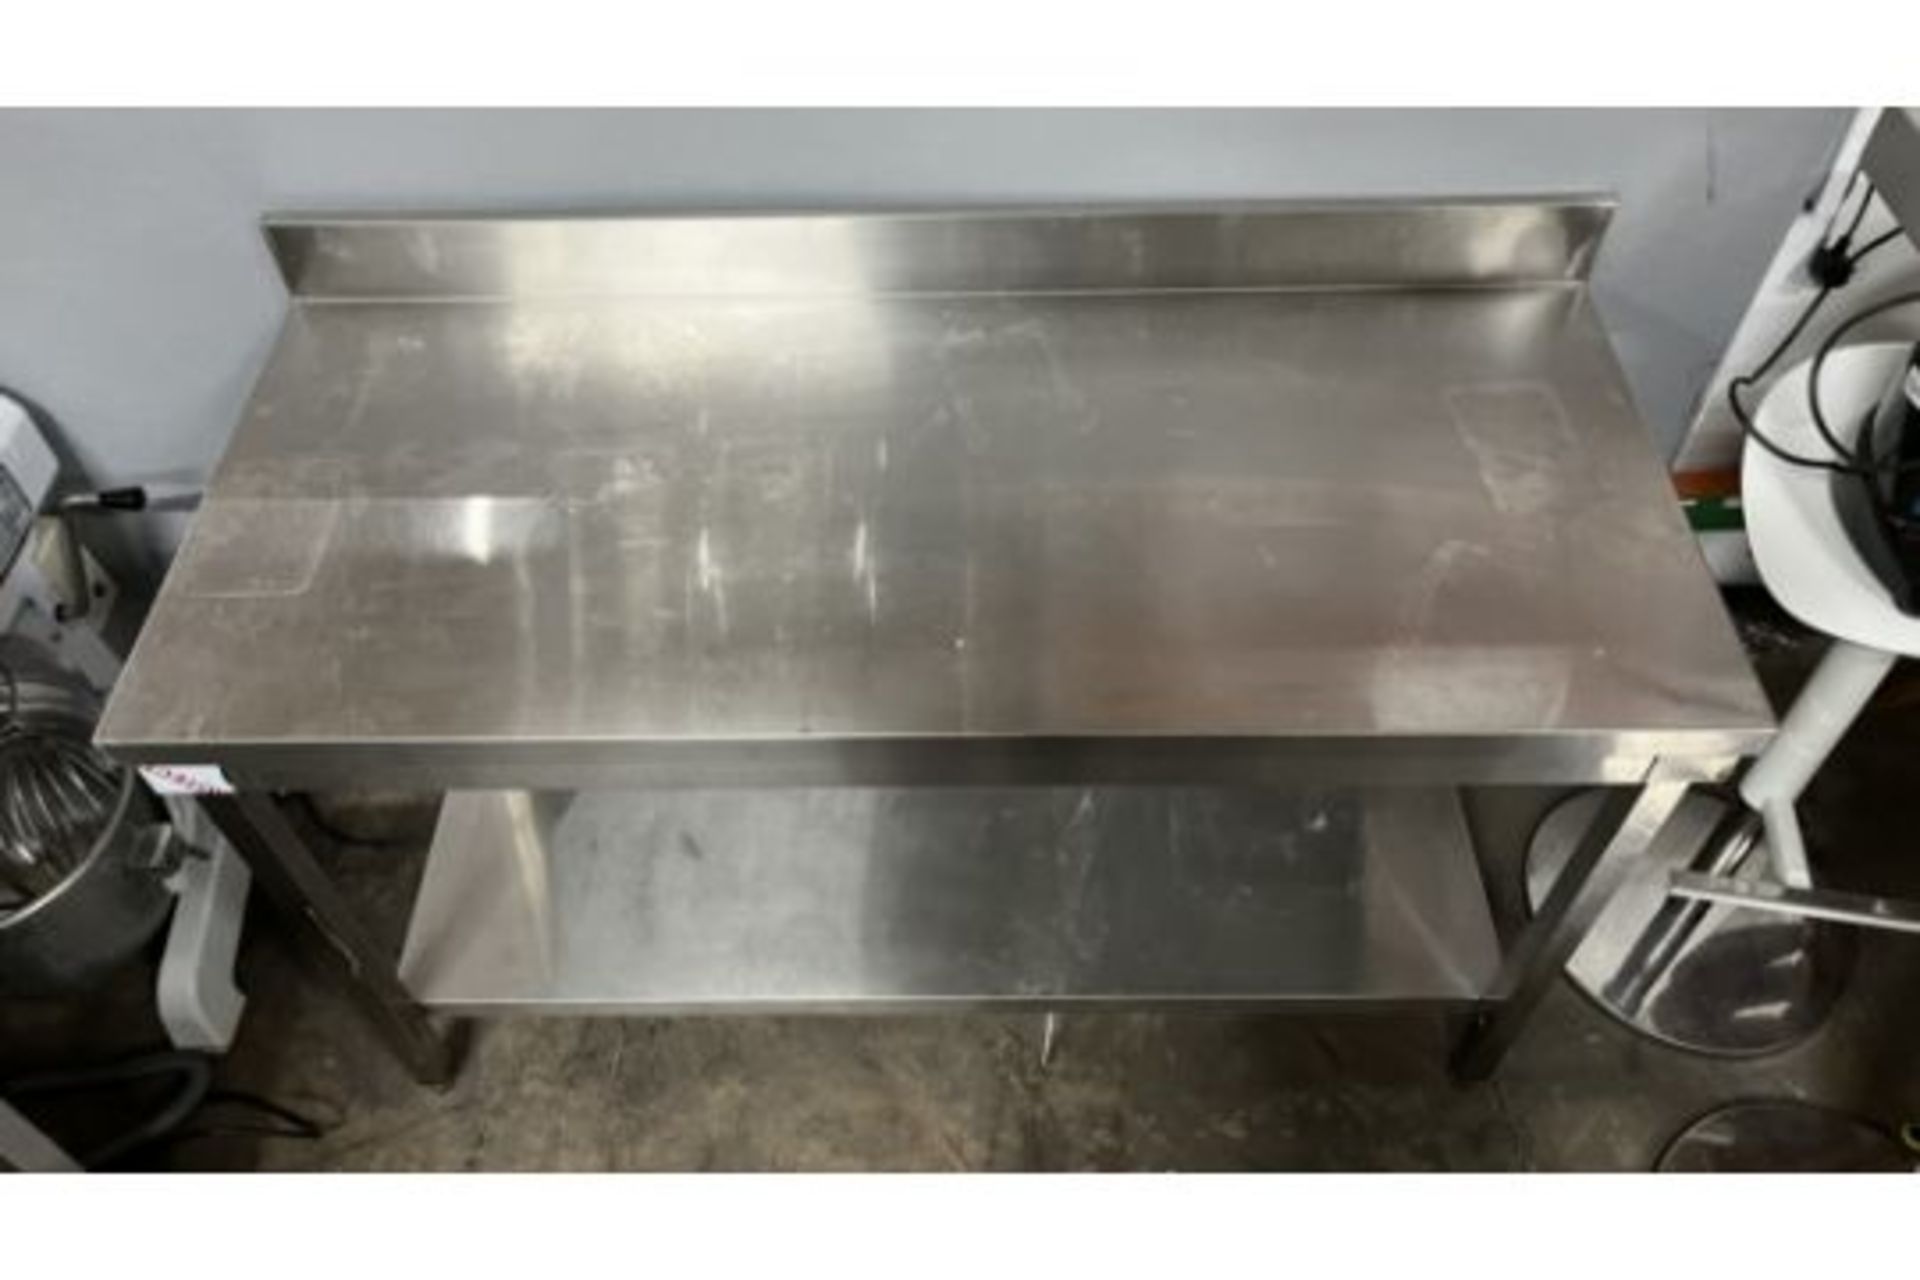 Stainless Steel Prep Table W/ Under Shelf - Image 2 of 2